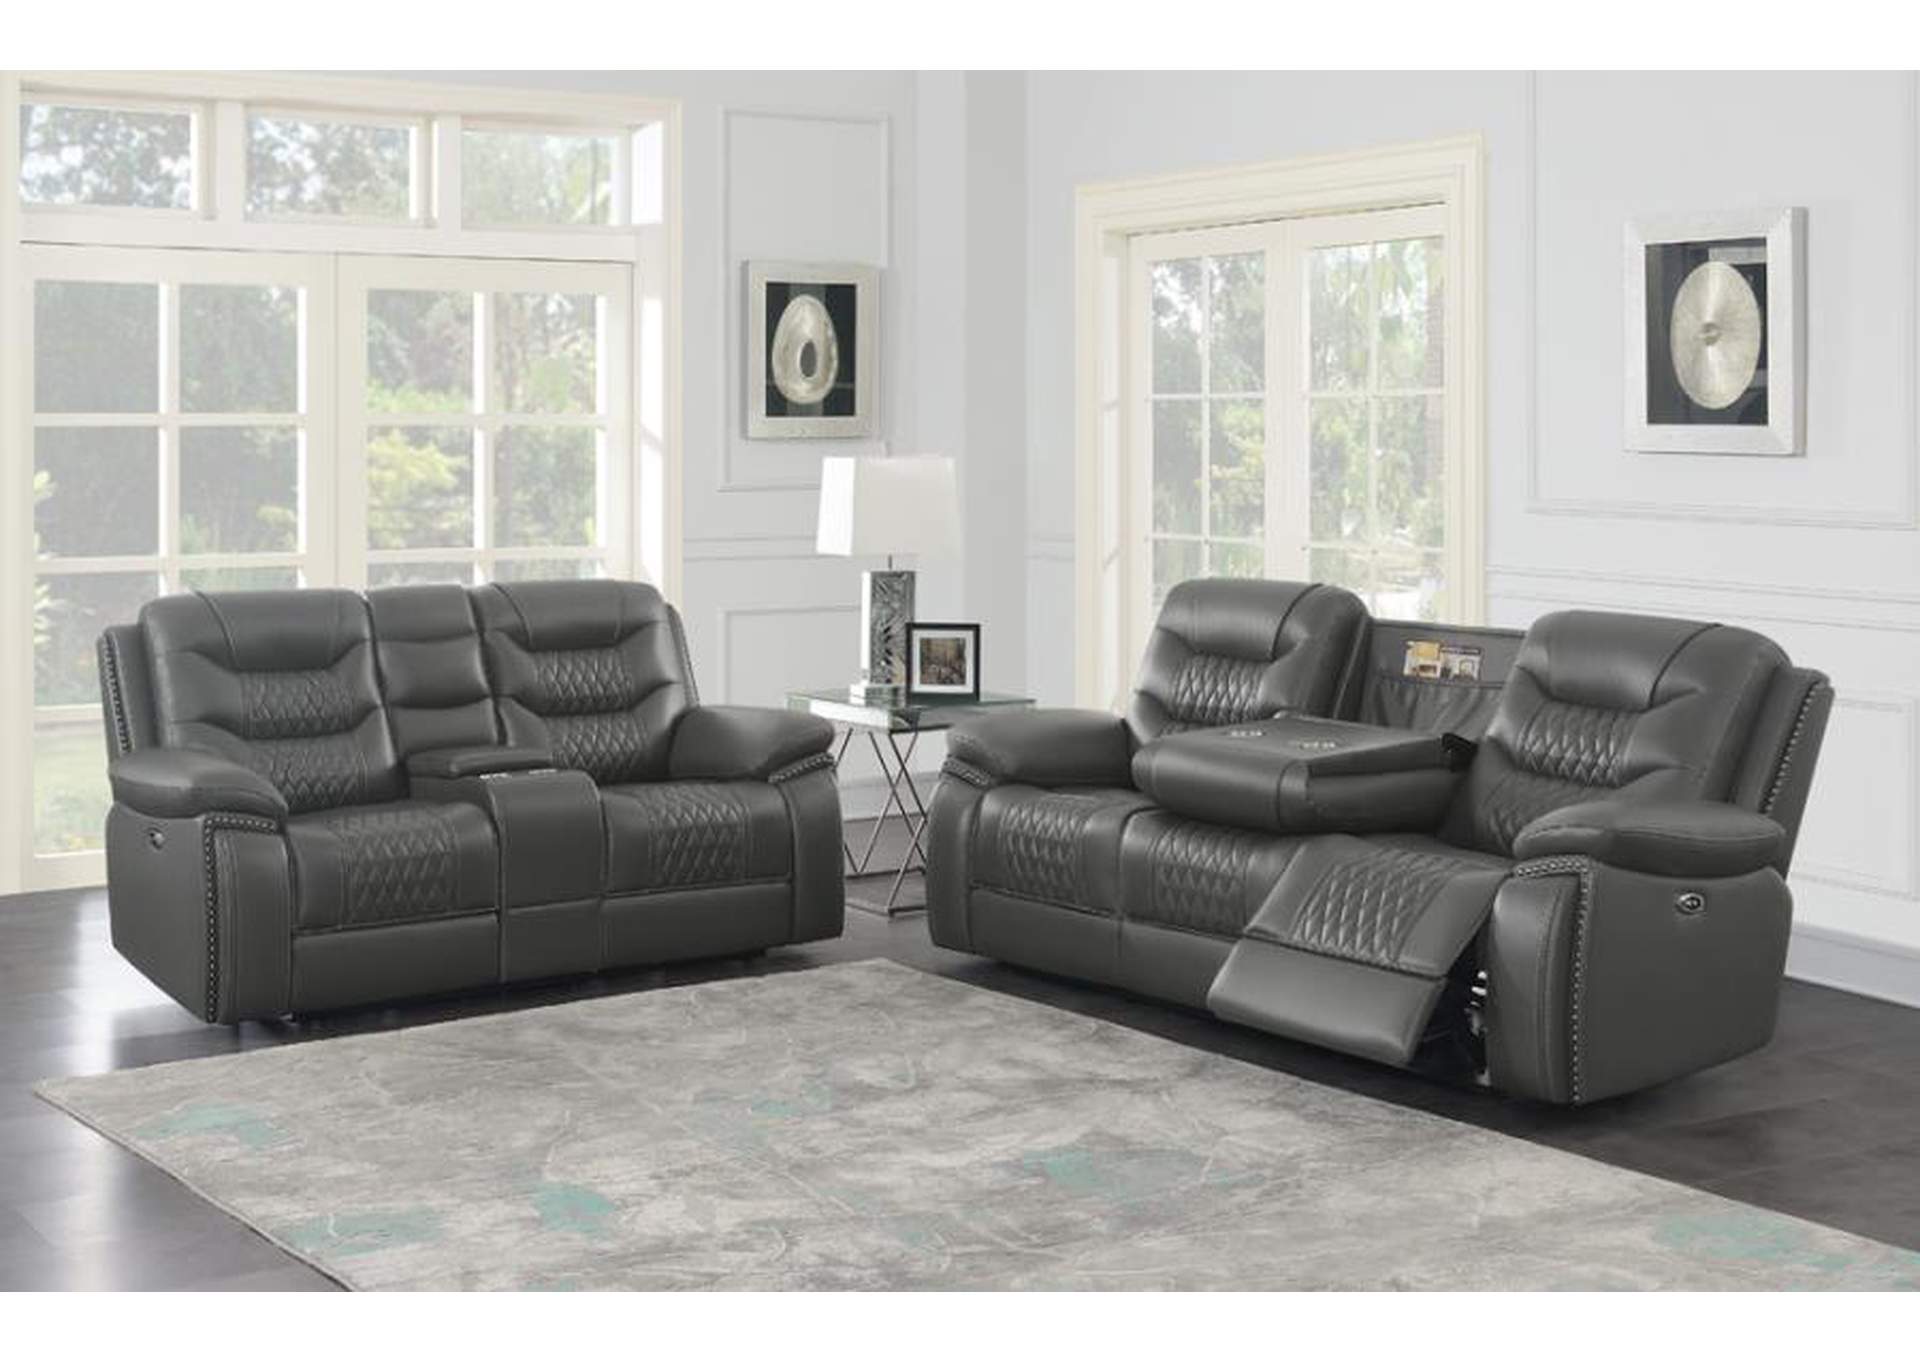 Flamenco 2-piece Tufted Upholstered Power Living Room Set Charcoal,Coaster Furniture